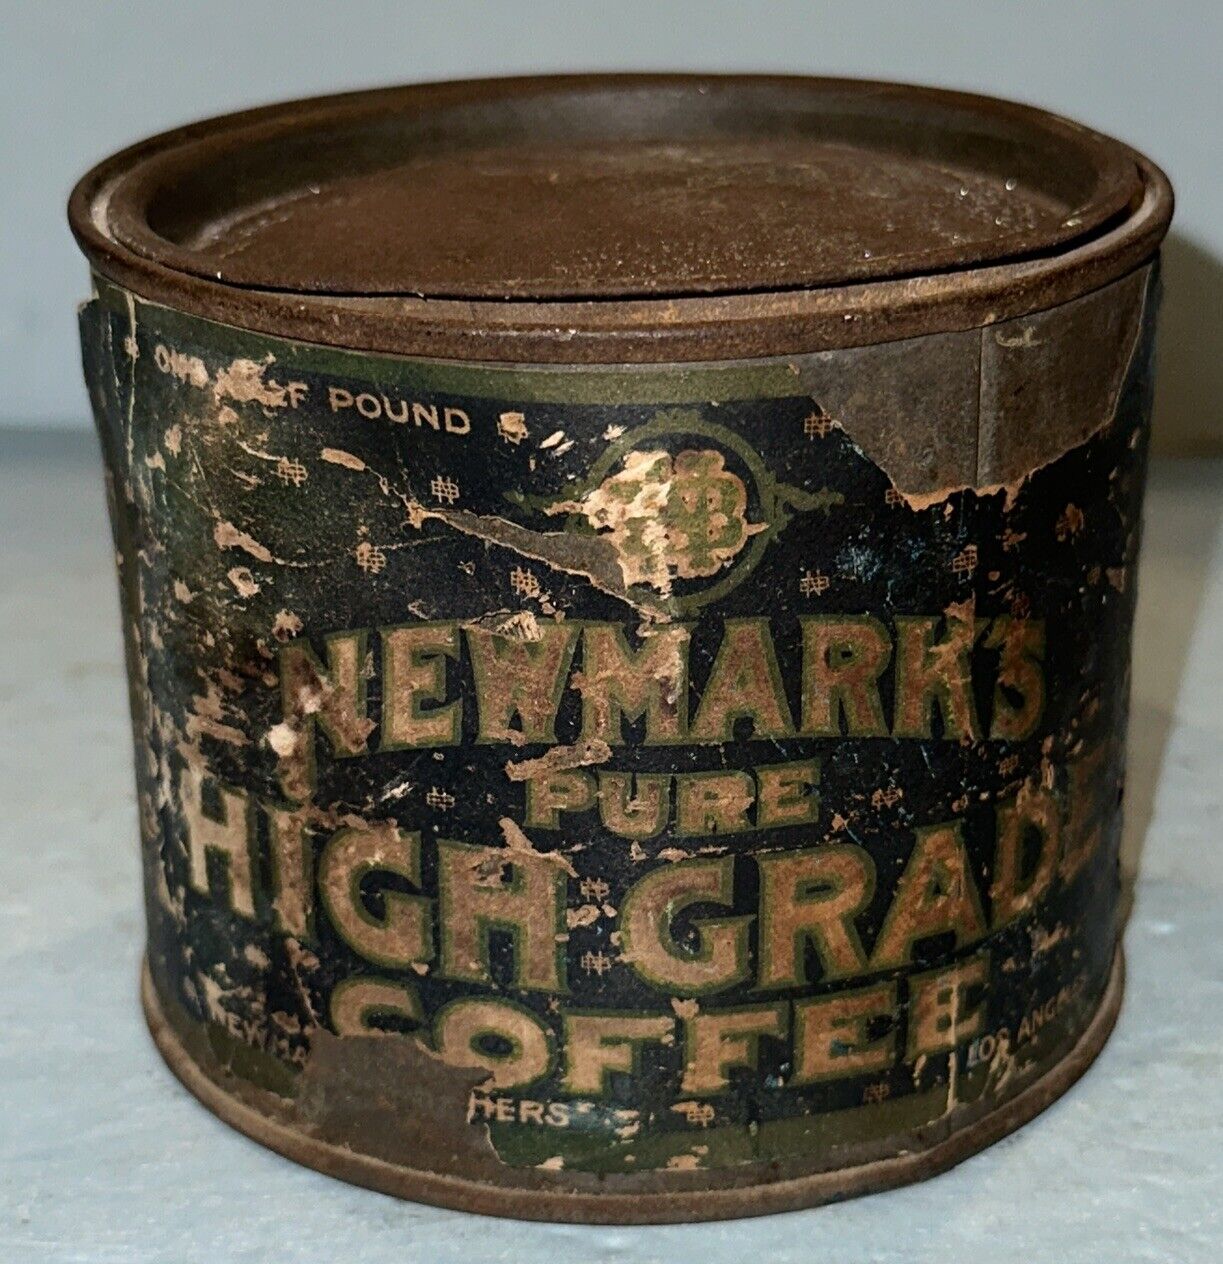 Vintage Newmark’s Pure High Grade Coffee Tin Can 1/2 lb. Los Angeles Paper Label